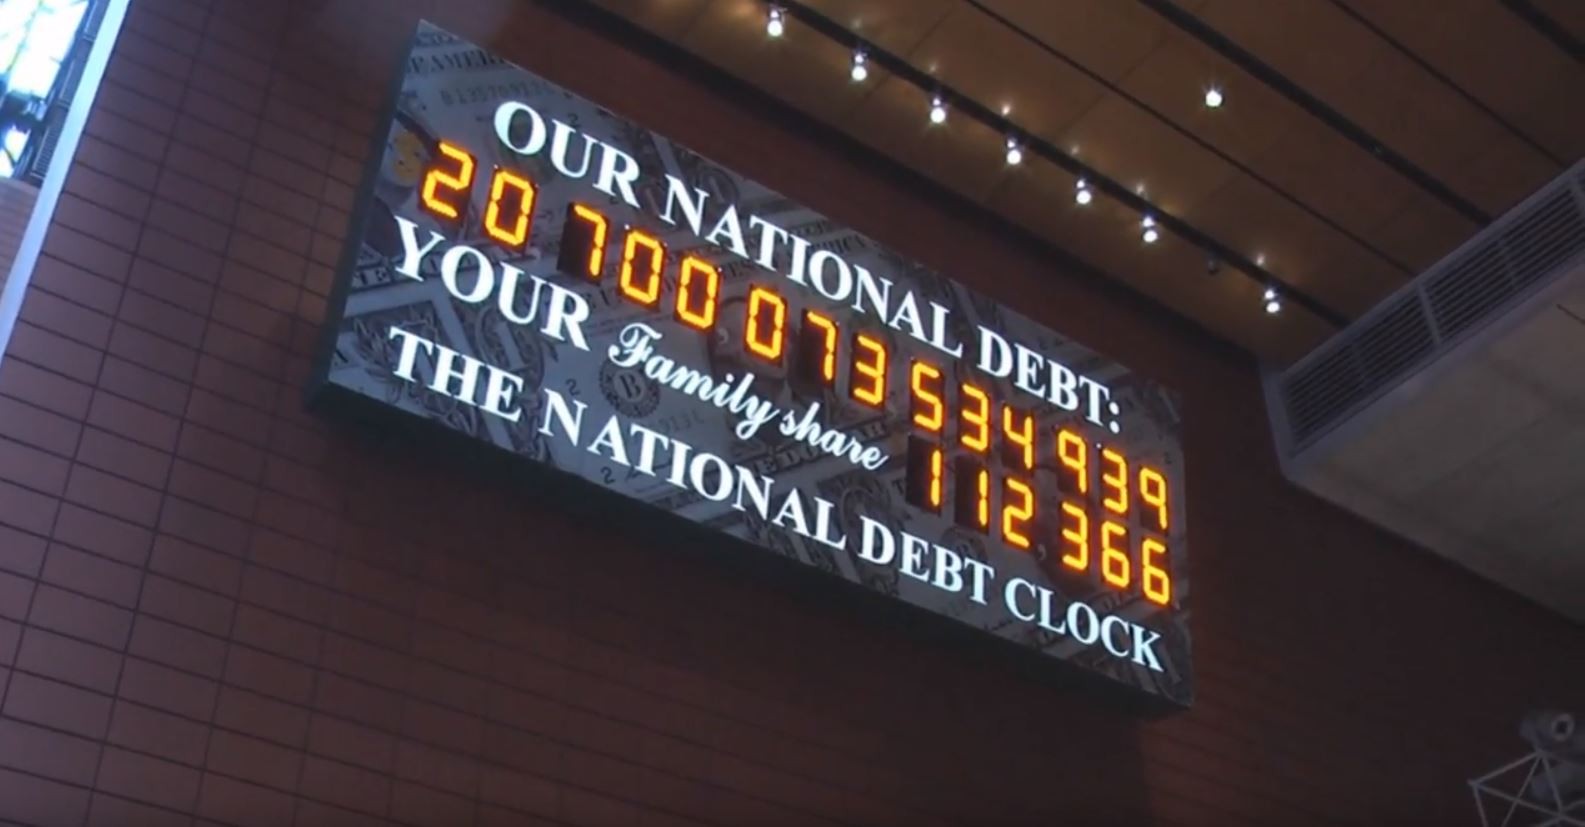 A billboard with a ticker keeps track of the US national debt. Photo: YouTube